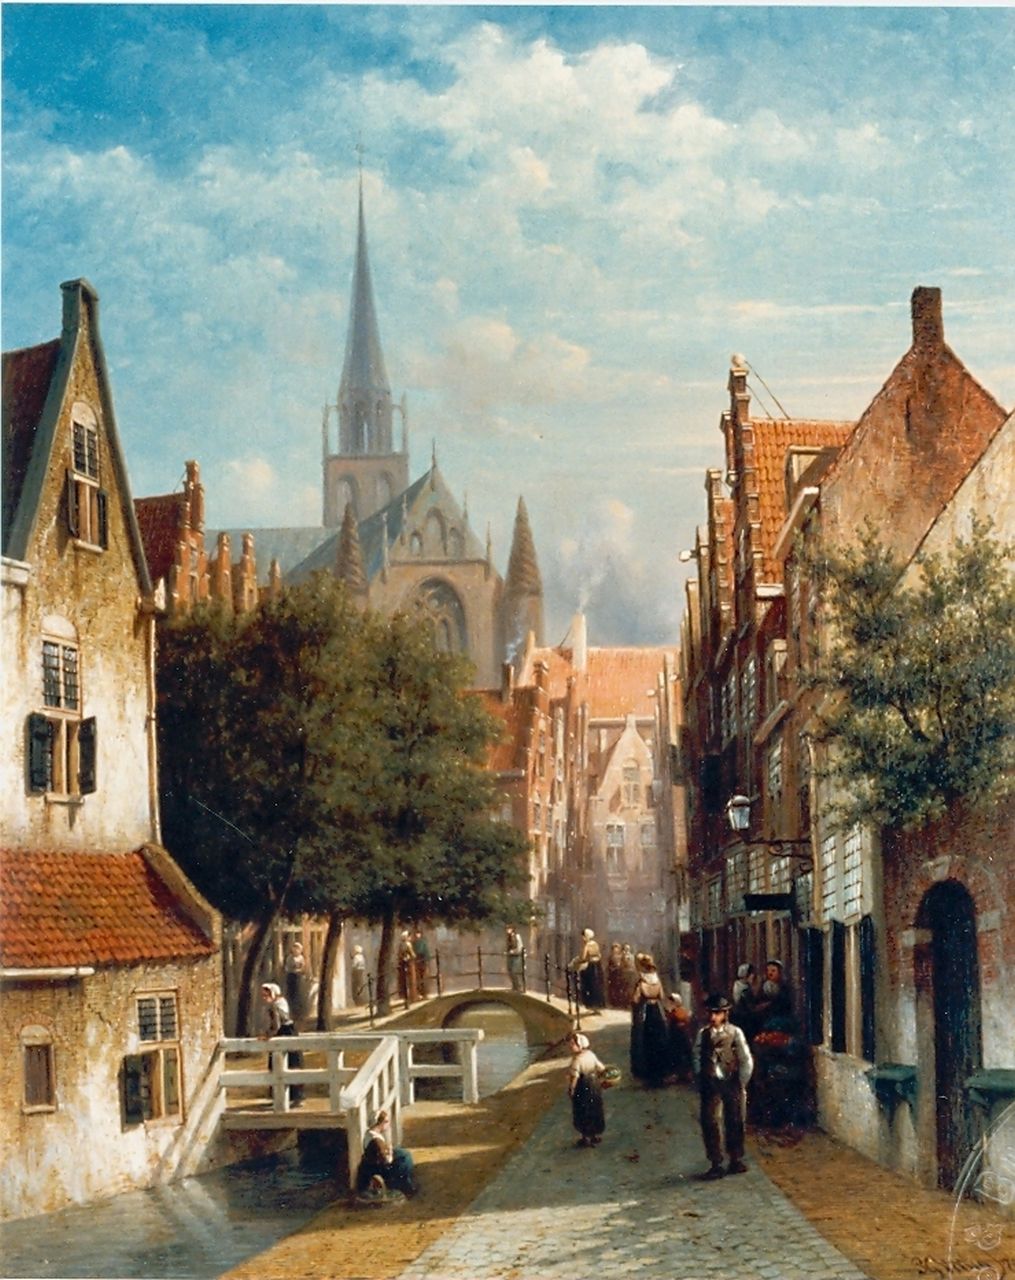 Vertin P.G.  | Petrus Gerardus Vertin, Townscape, oil on canvas 61.0 x 49.0 cm, signed l.r. and dated '72